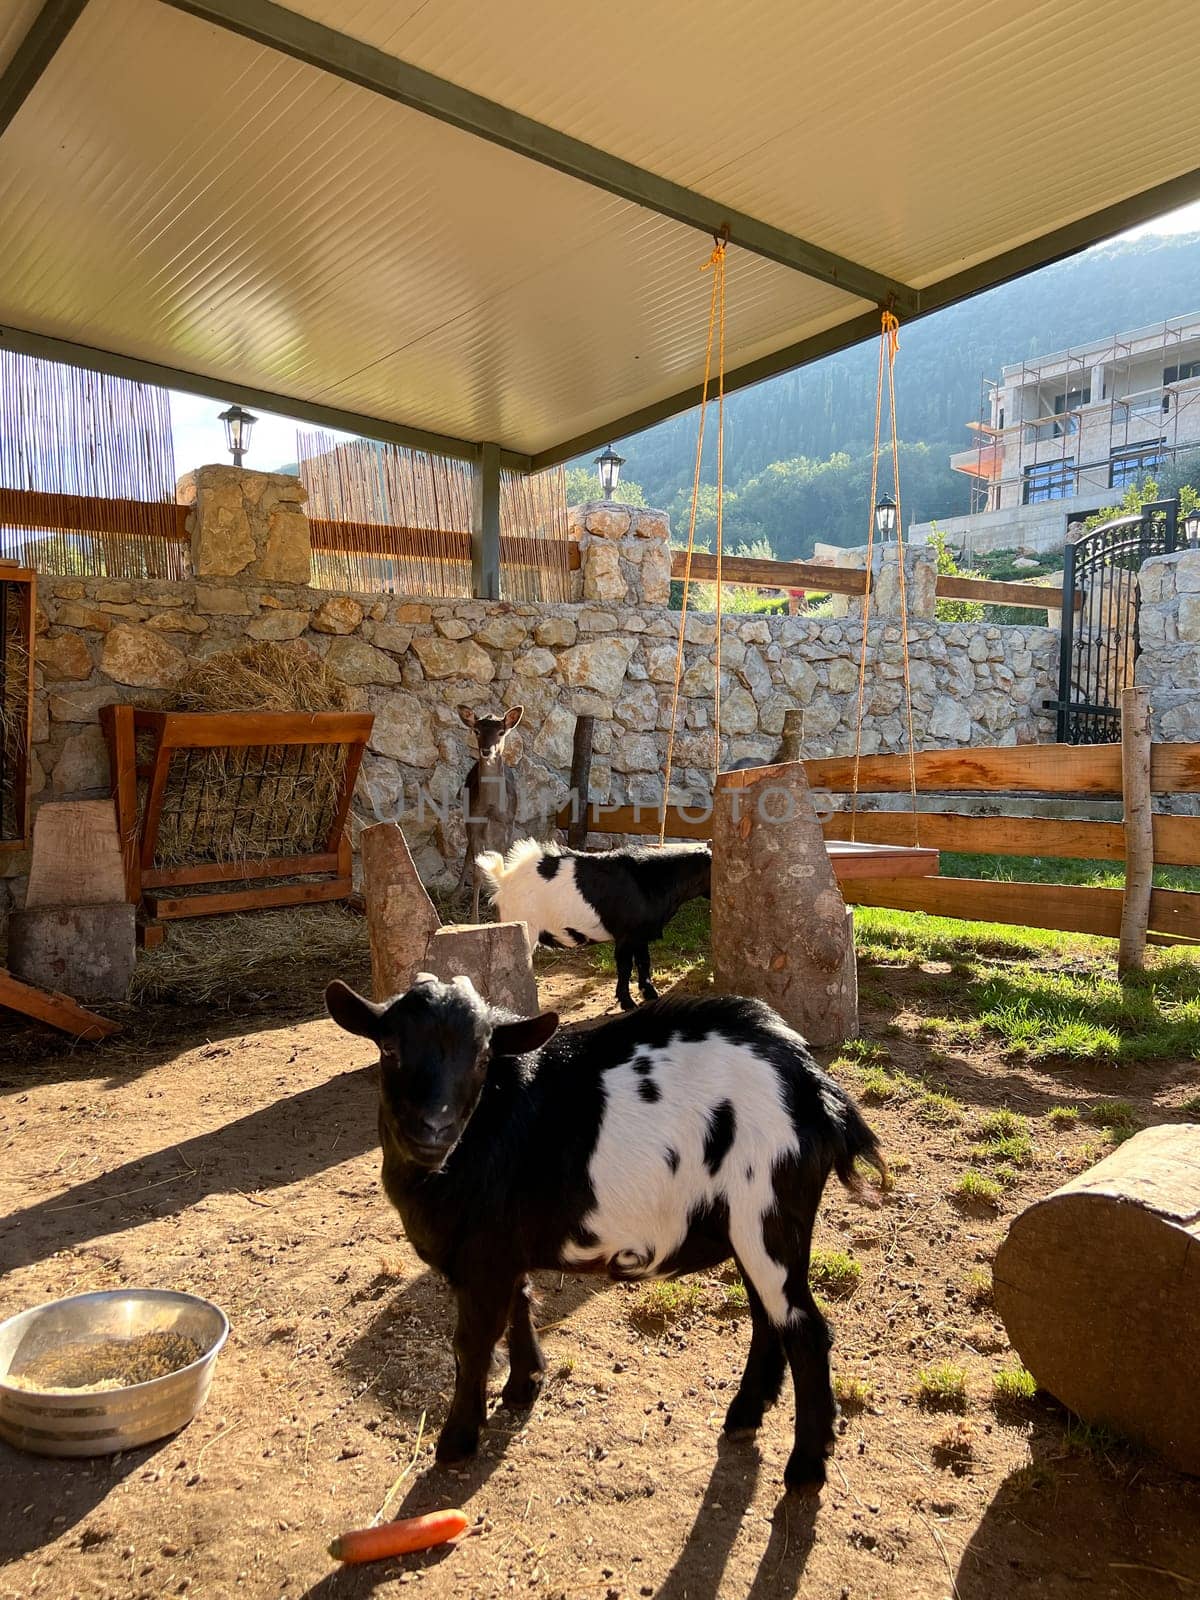 Goatling stands near a feeder with carrots in a corral by Nadtochiy